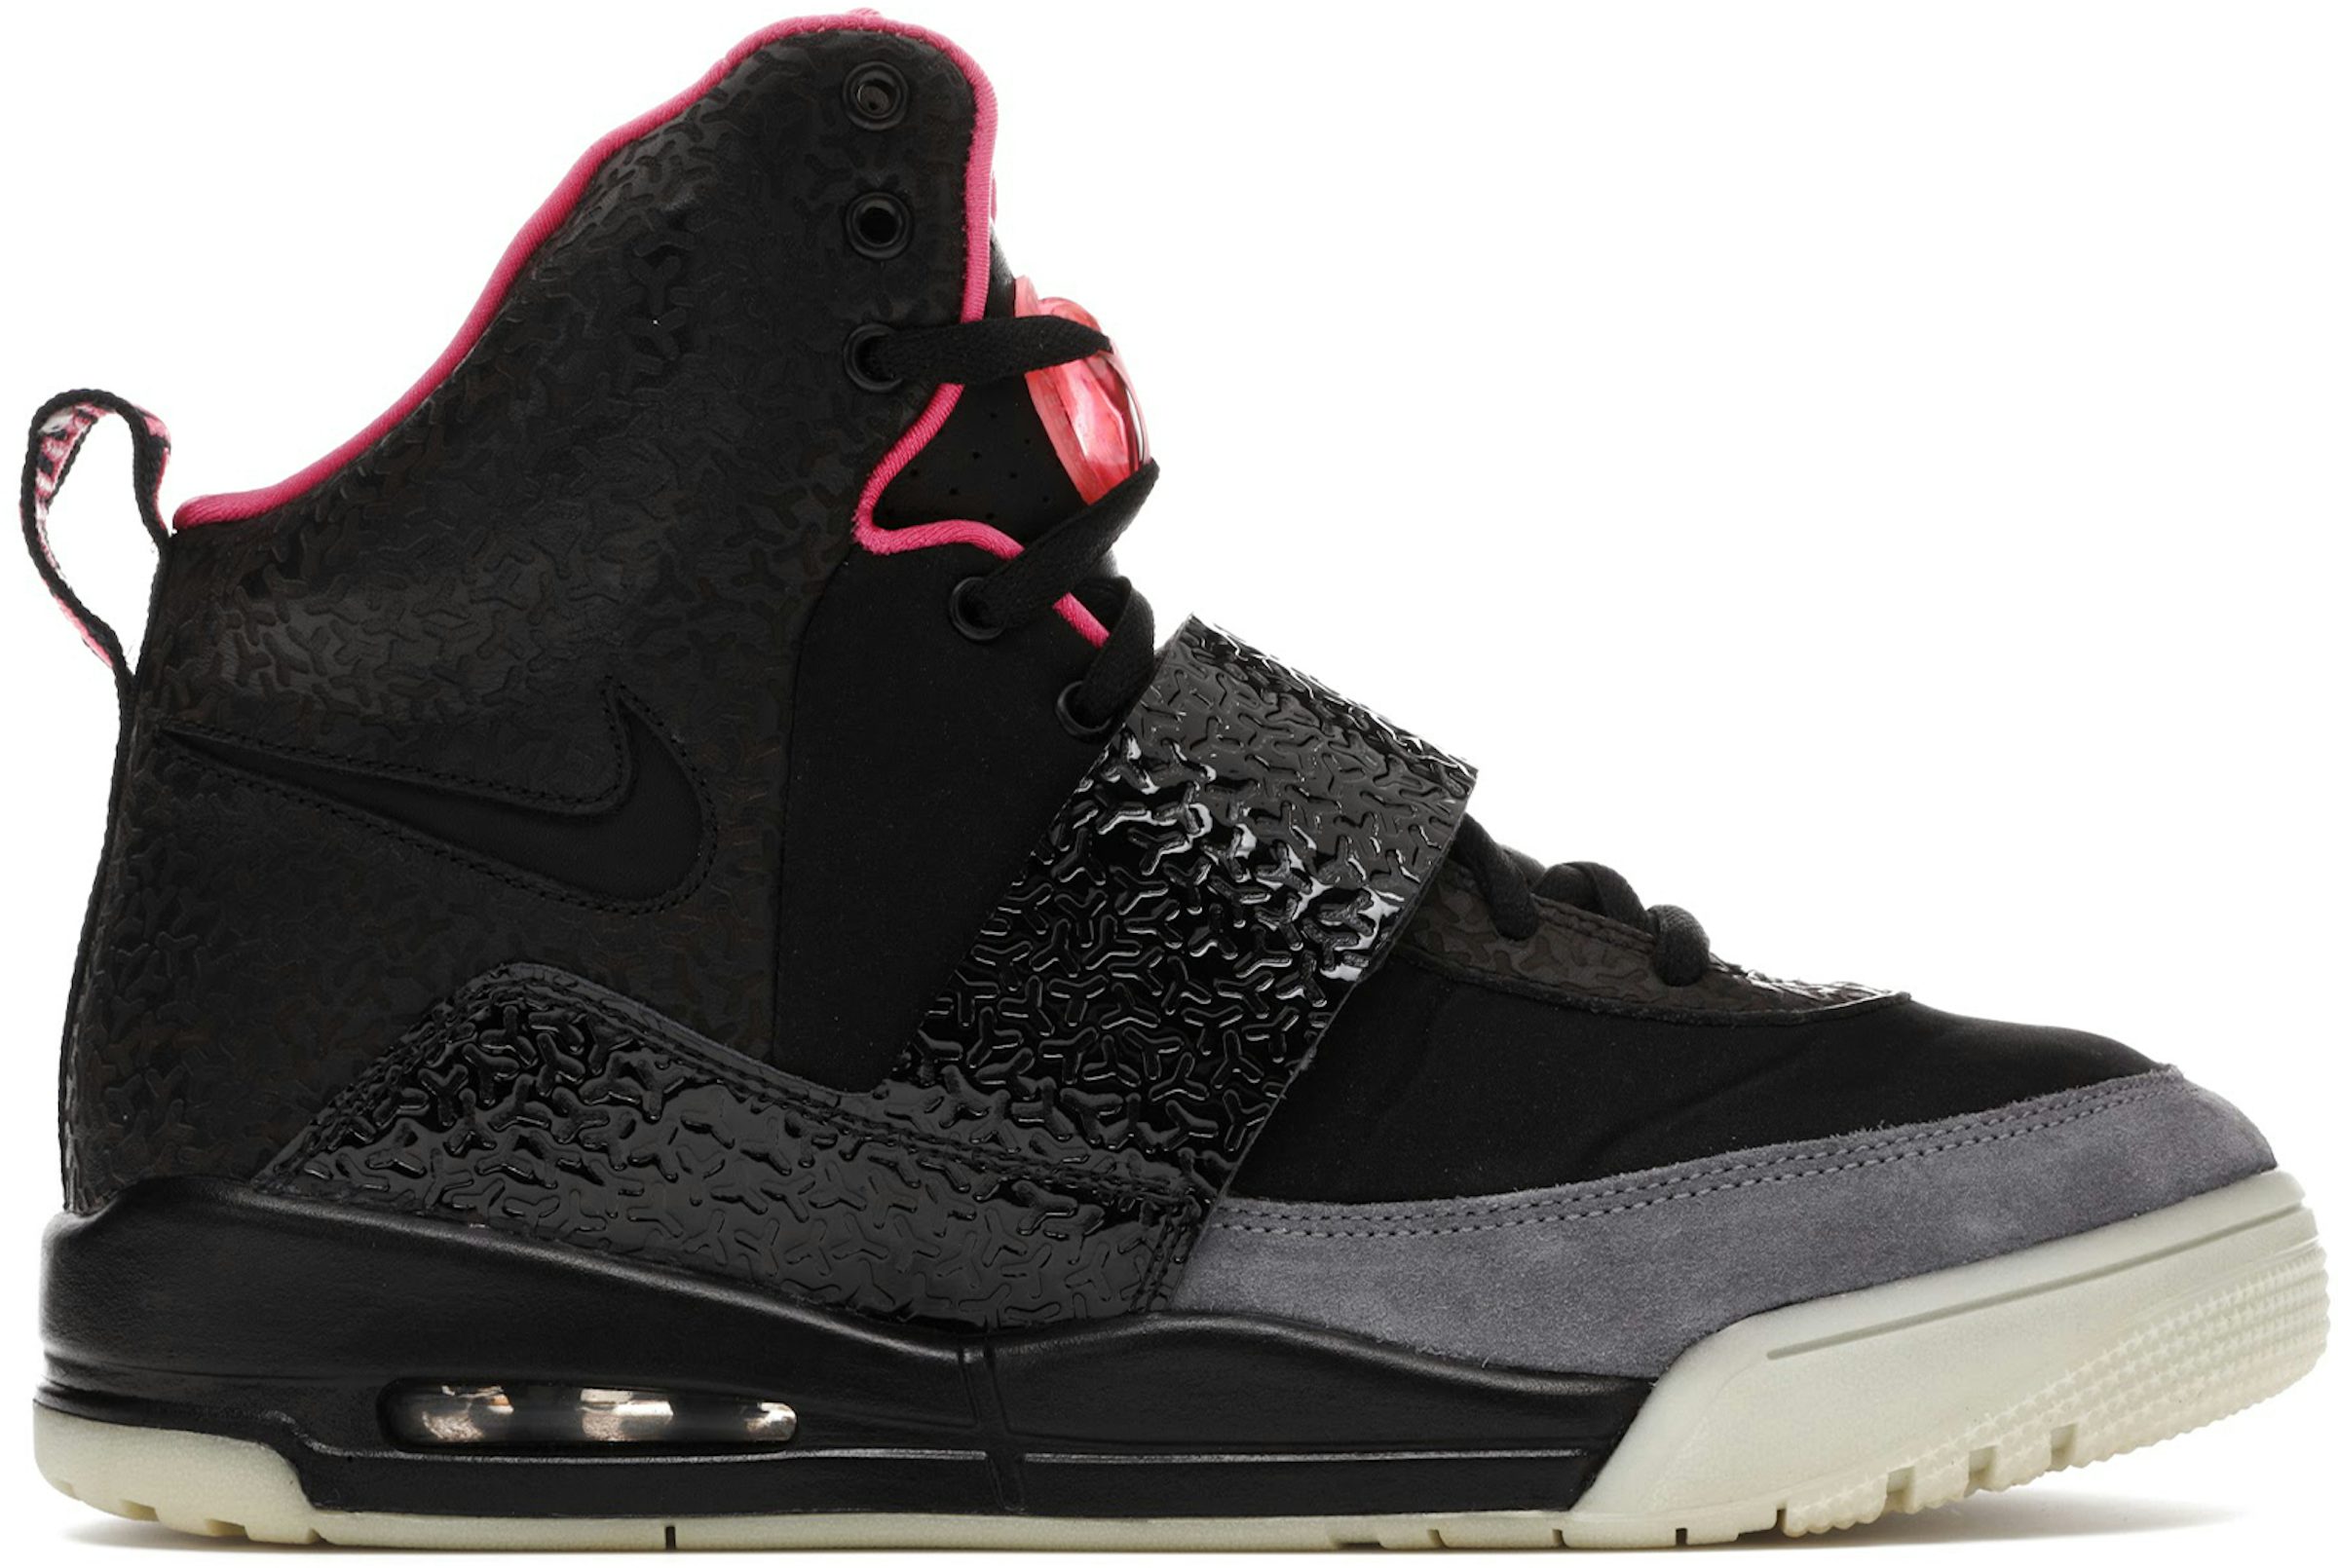 Kanye West and Mark Smith Designed Nike Air Yeezy, Zen Grey/Neon,  Prototype/Sample, Size 9, From the Archive, Day 2, Kanye West Designed Nike  Air Yeezy Prototypes, 2020